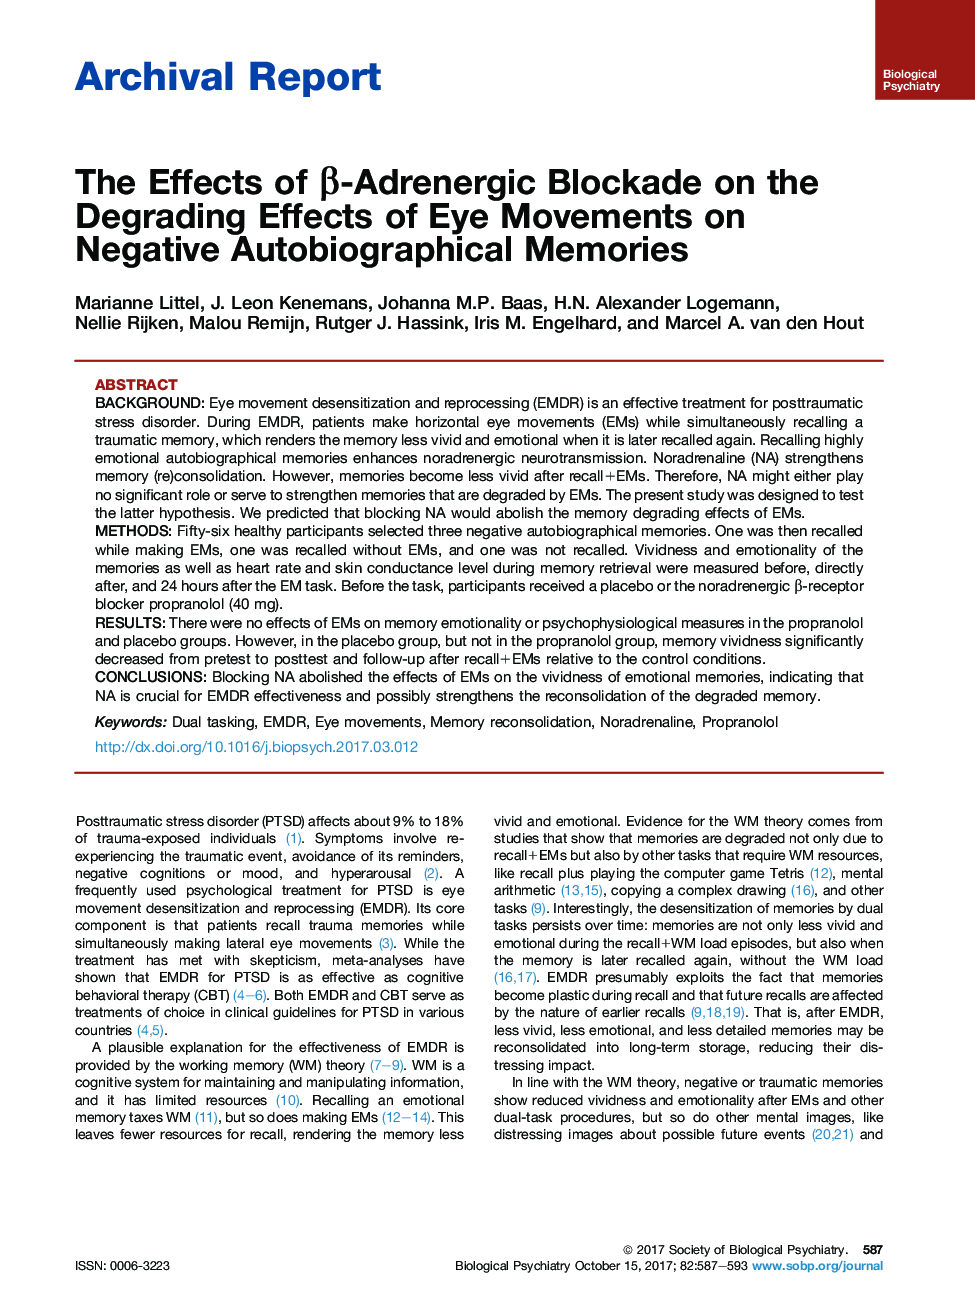 Archival ReportThe Effects of Î²-Adrenergic Blockade on the Degrading Effects of Eye Movements on Negative Autobiographical Memories